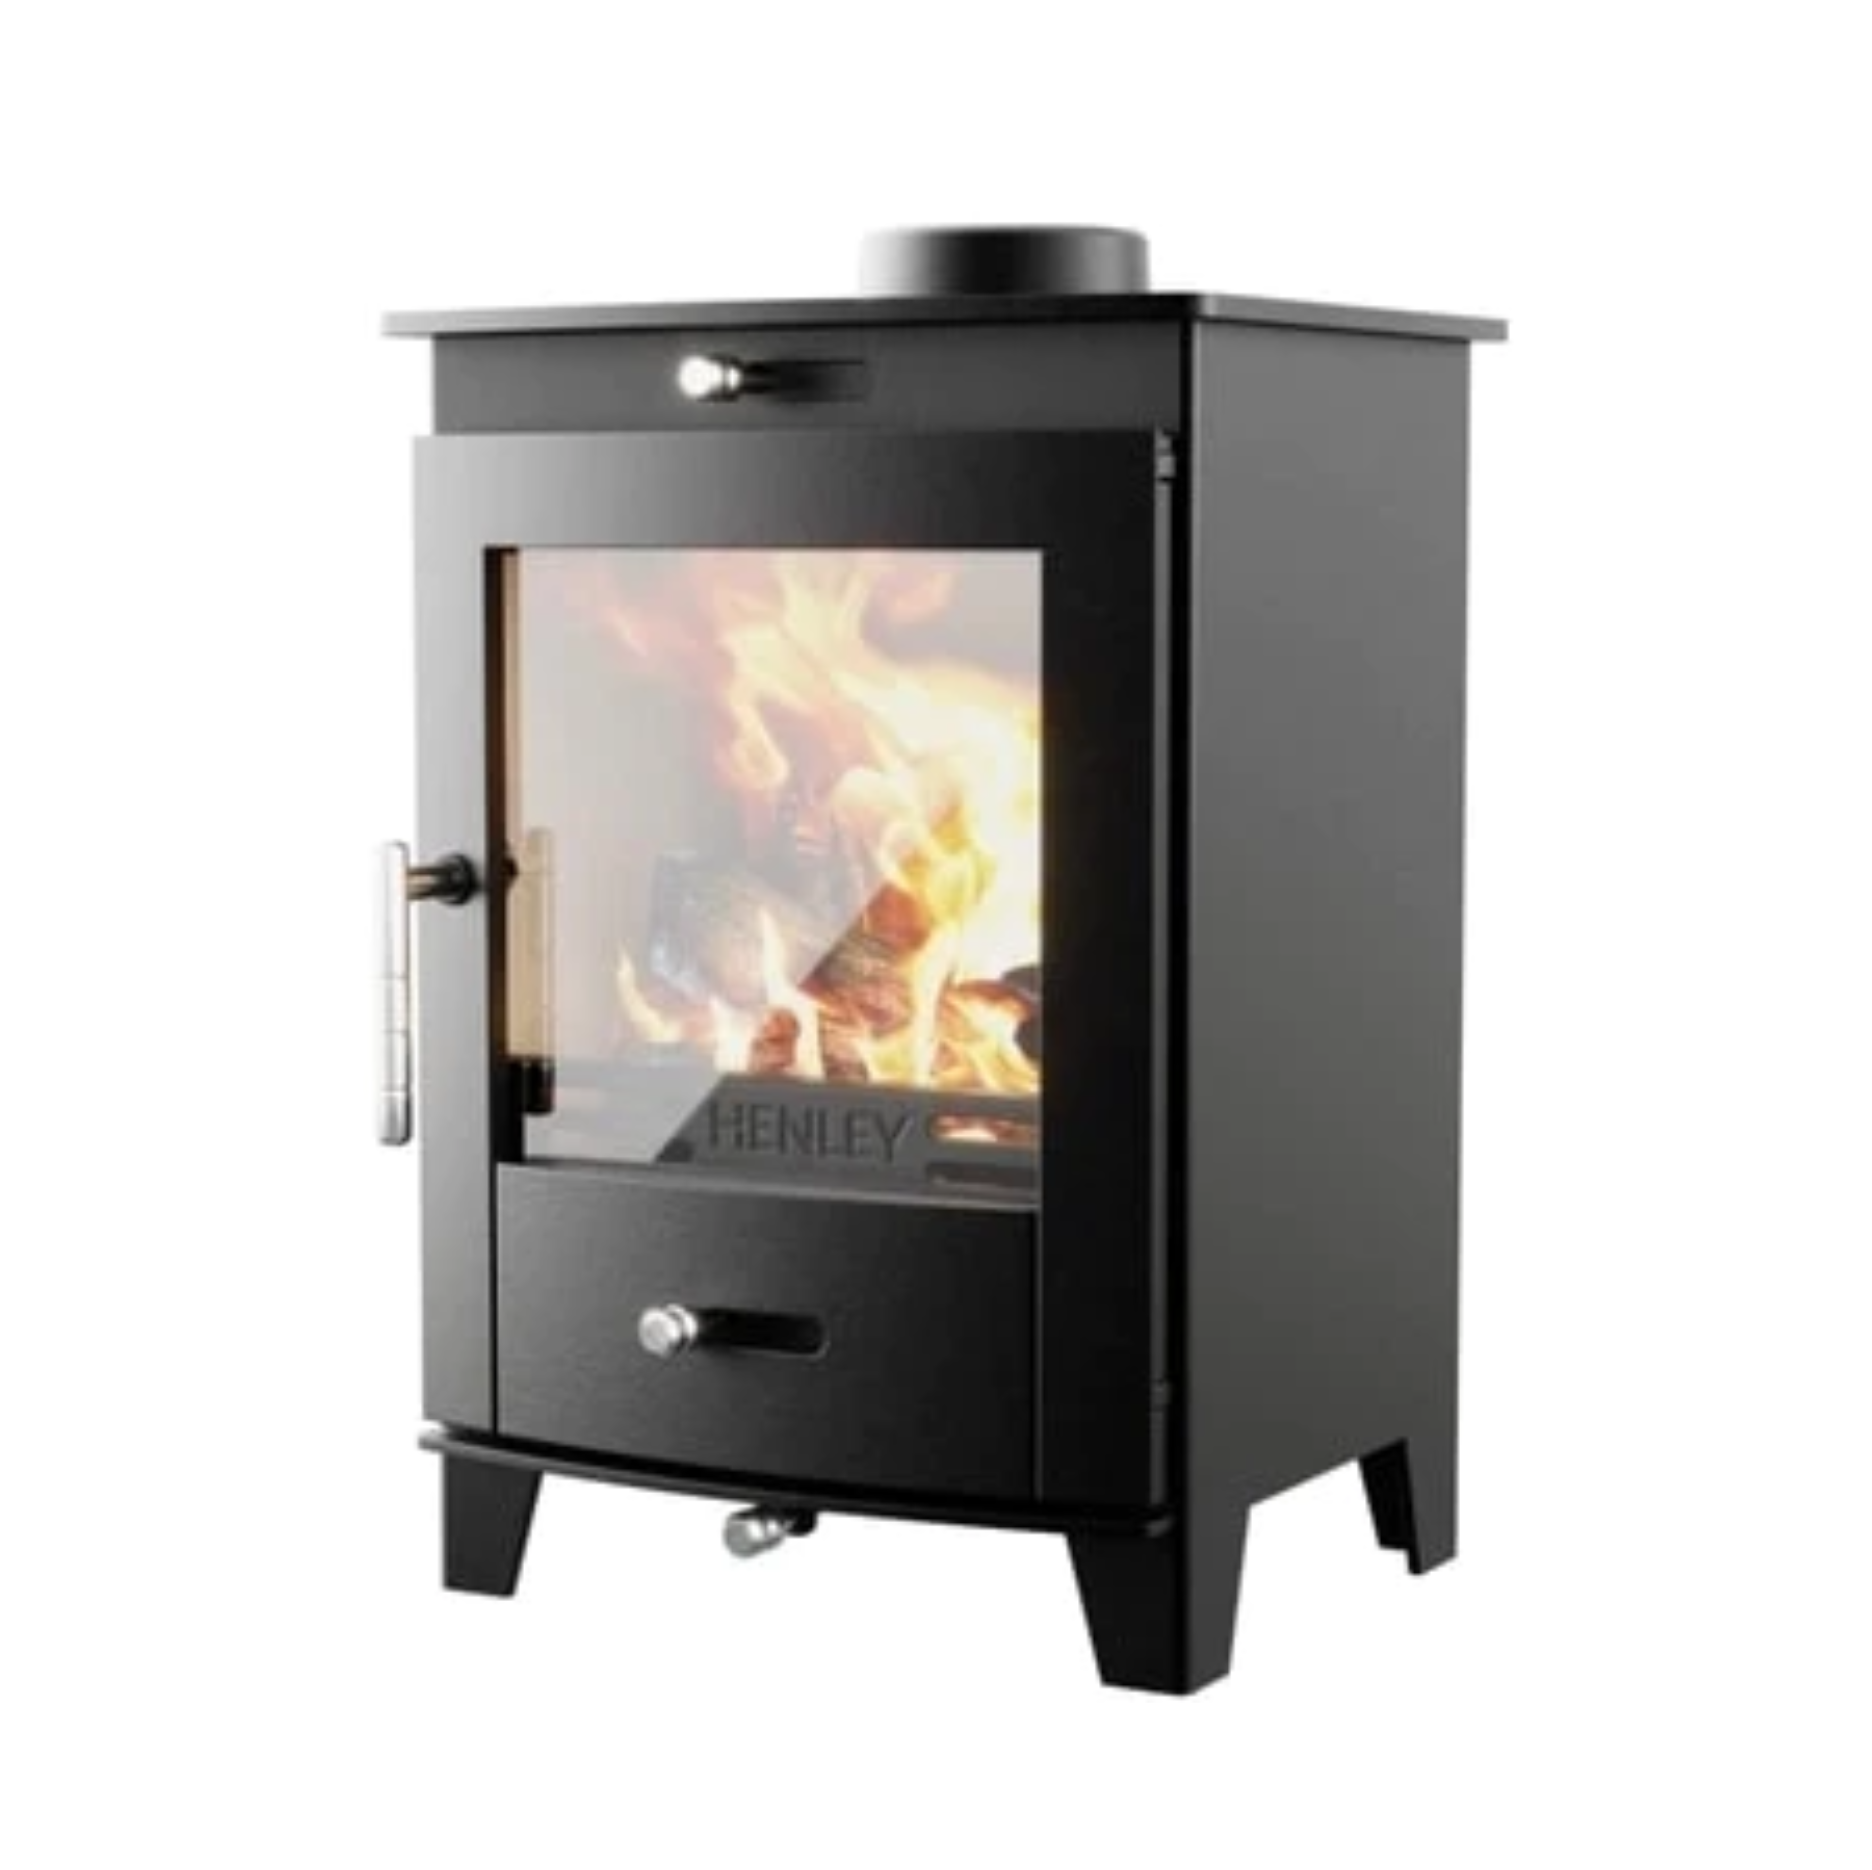 Redwood Room Heater Stove – Efficient and Stylish Heating Solution 5kW